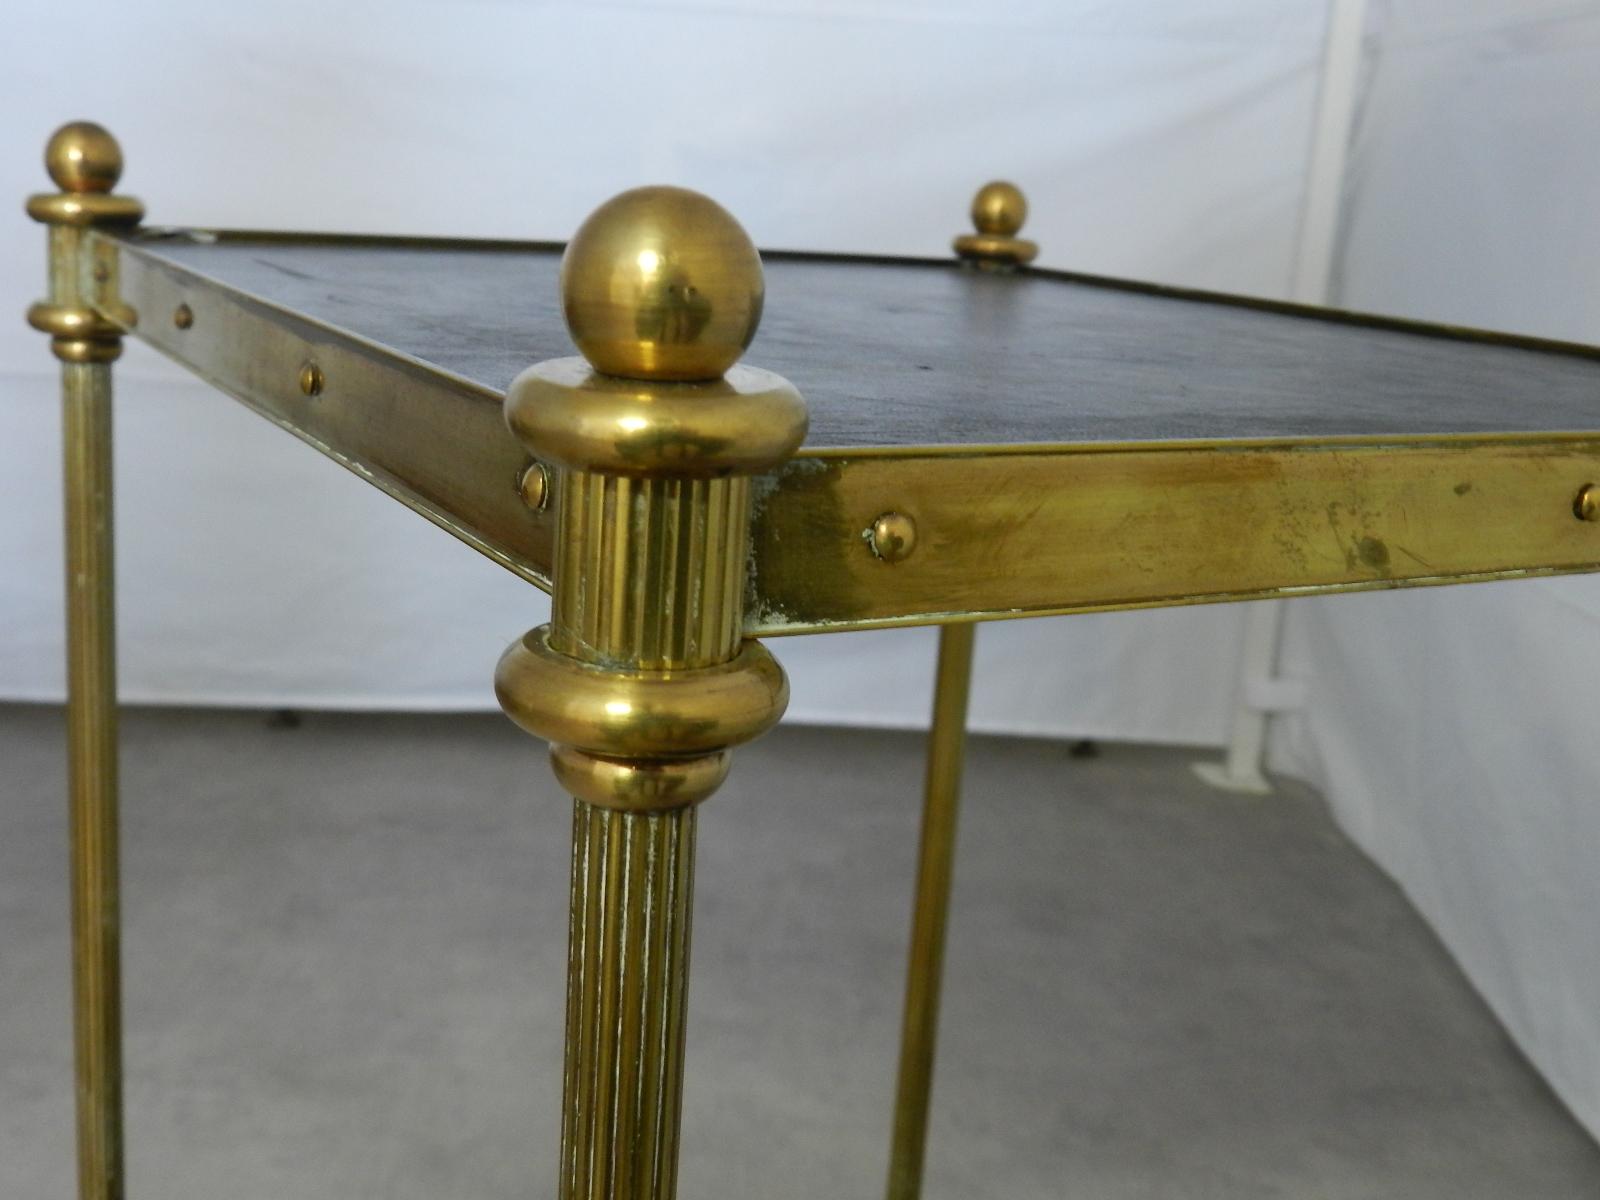 Small side table midcentury two-tier étagère style of Maison Baguès
Black leather tops
Gilt brass finials and fluted legs
Sofa or end table
Good vintage condition one very small old repair to the leather to the edge on the lower tier not very